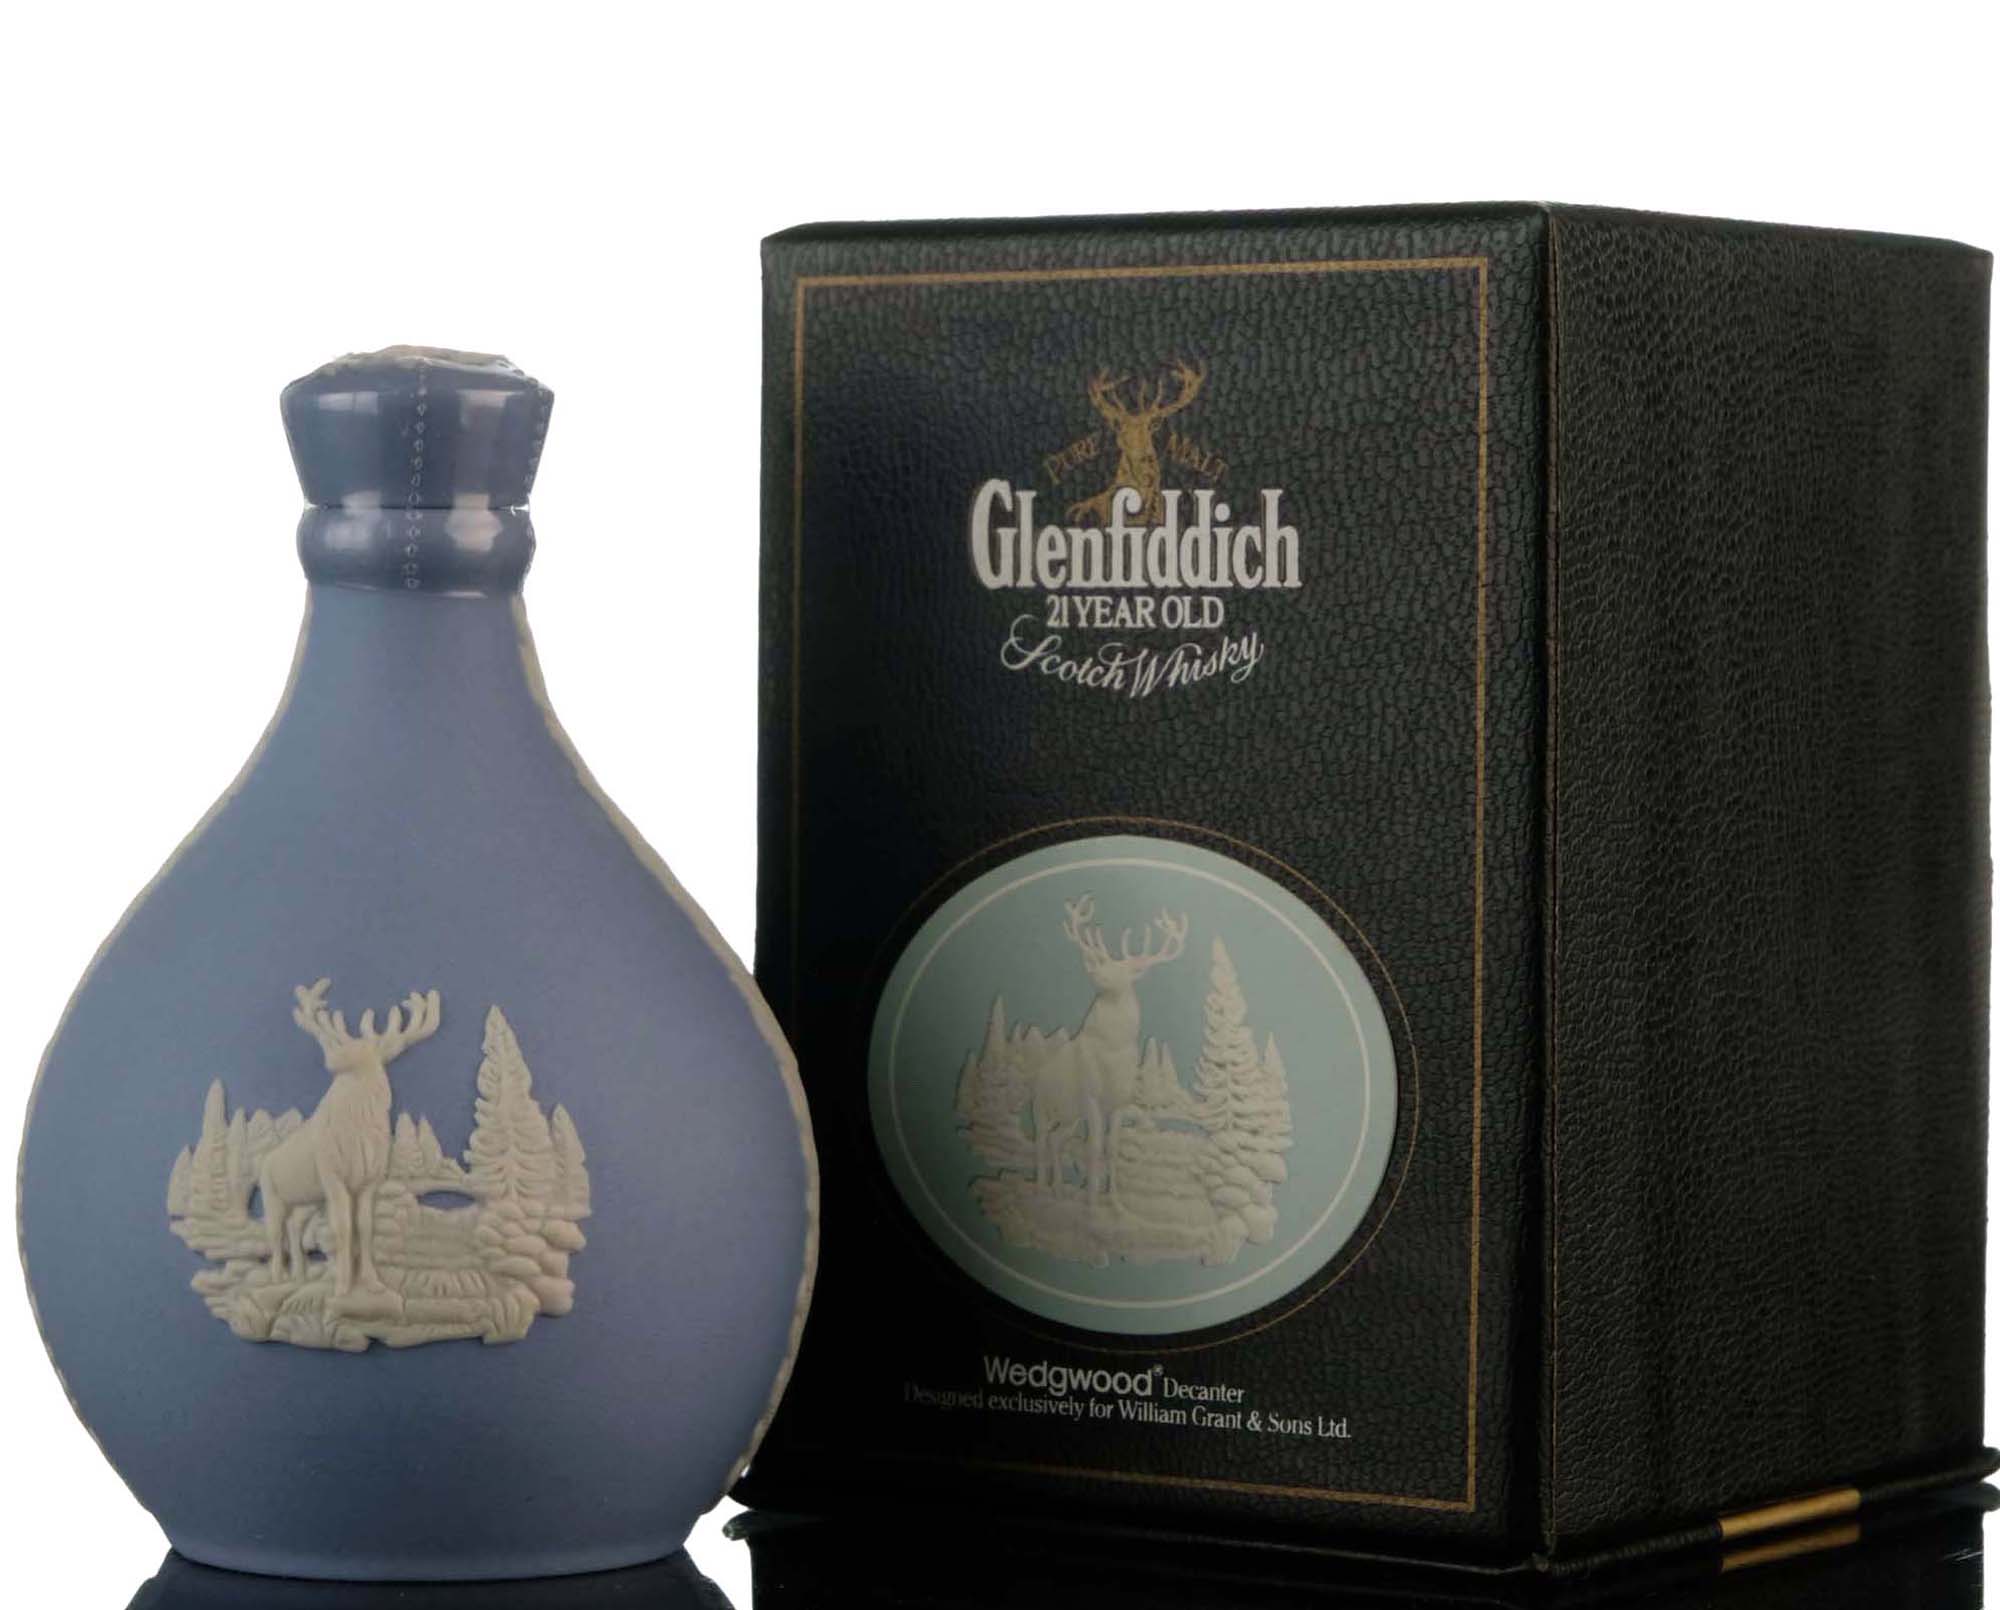 Glenfiddich 21 Year Old - Wedgwood Decanter - Centenary 1887-1987 - Miniature